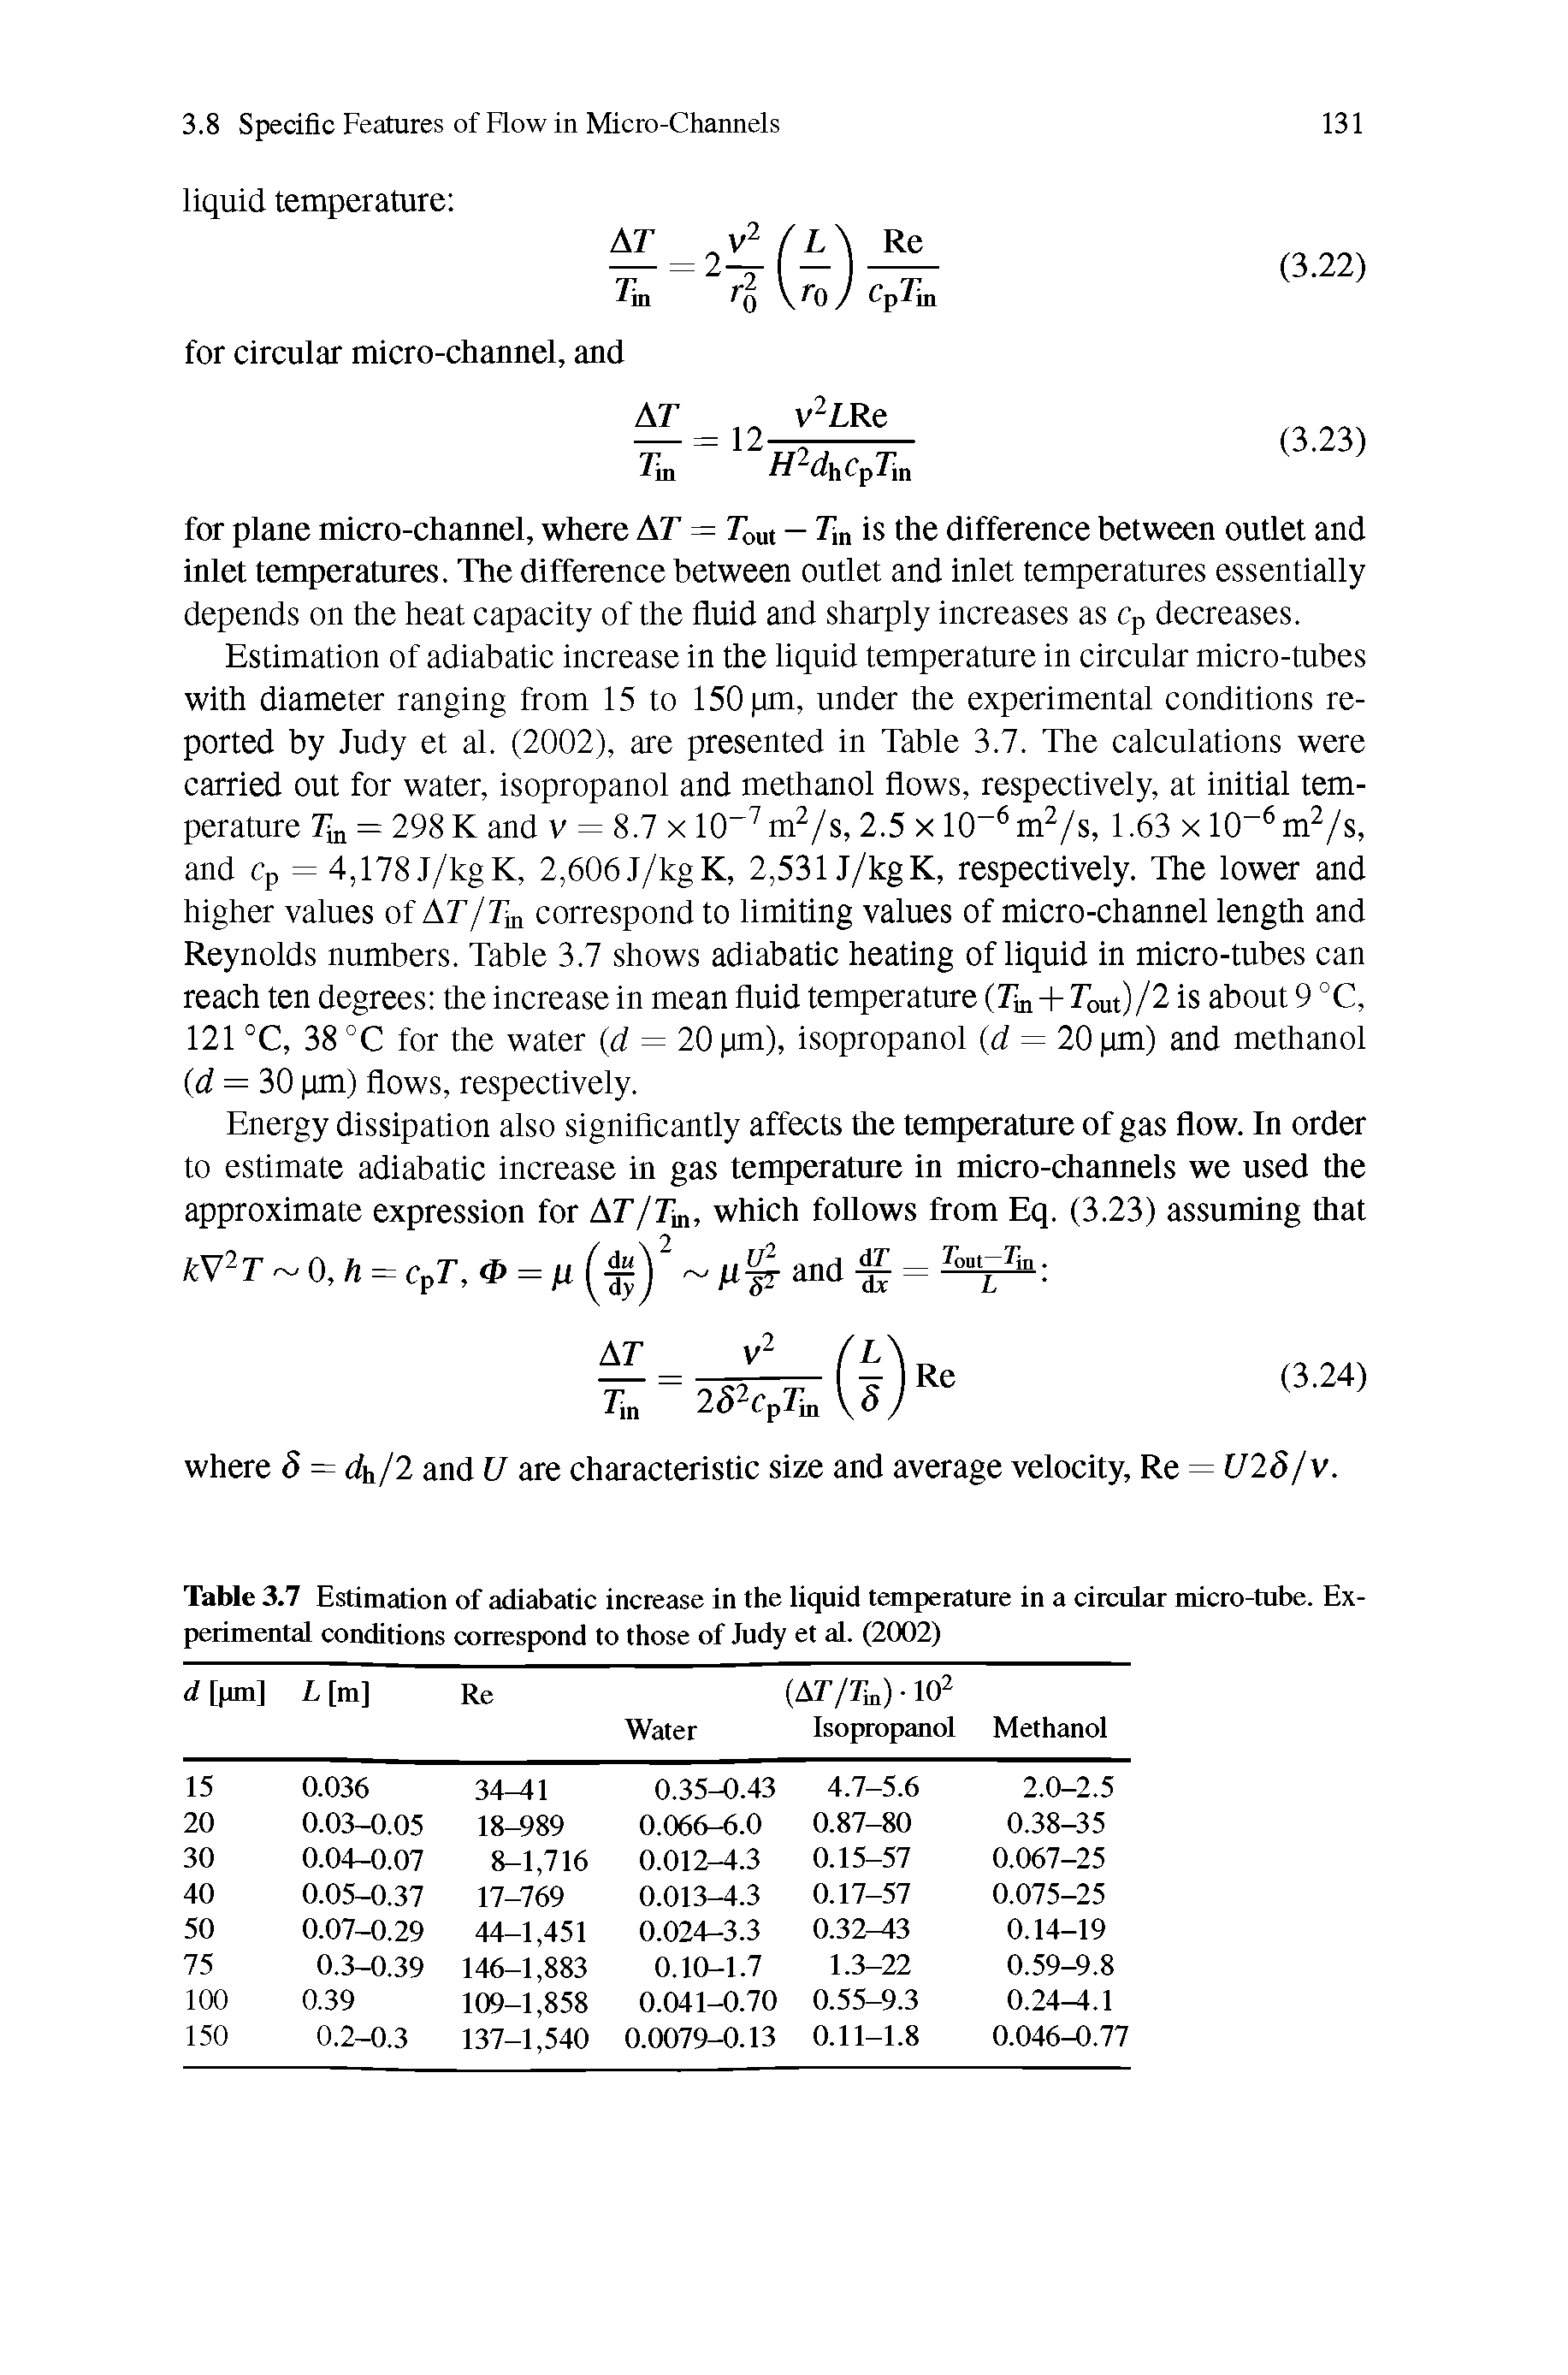 Table 3.7 Estimation of adiabatic increase in the liquid temperature in a circular micro-tube. Experimental conditions correspond to those of Judy et al. (2002)...